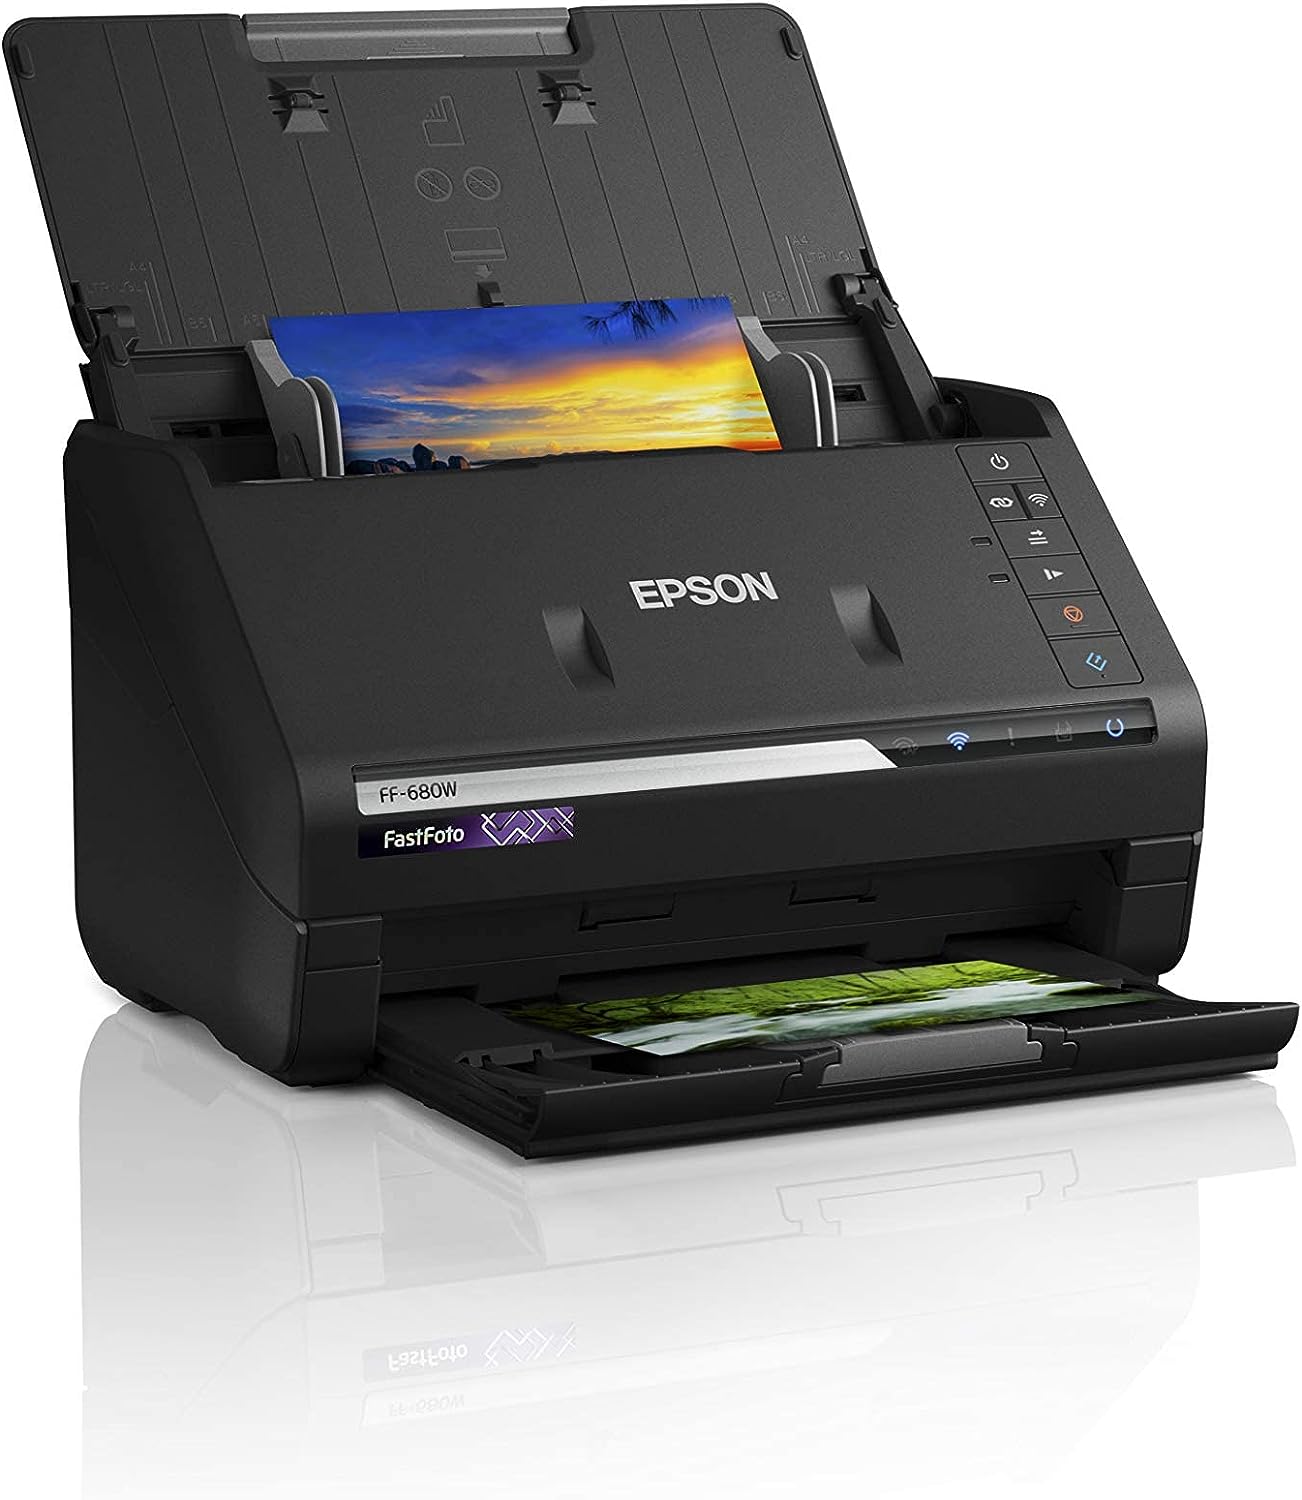 Epson Fastfoto Ff 680w Wireless Scanning System Review Stay At Home Business 4960